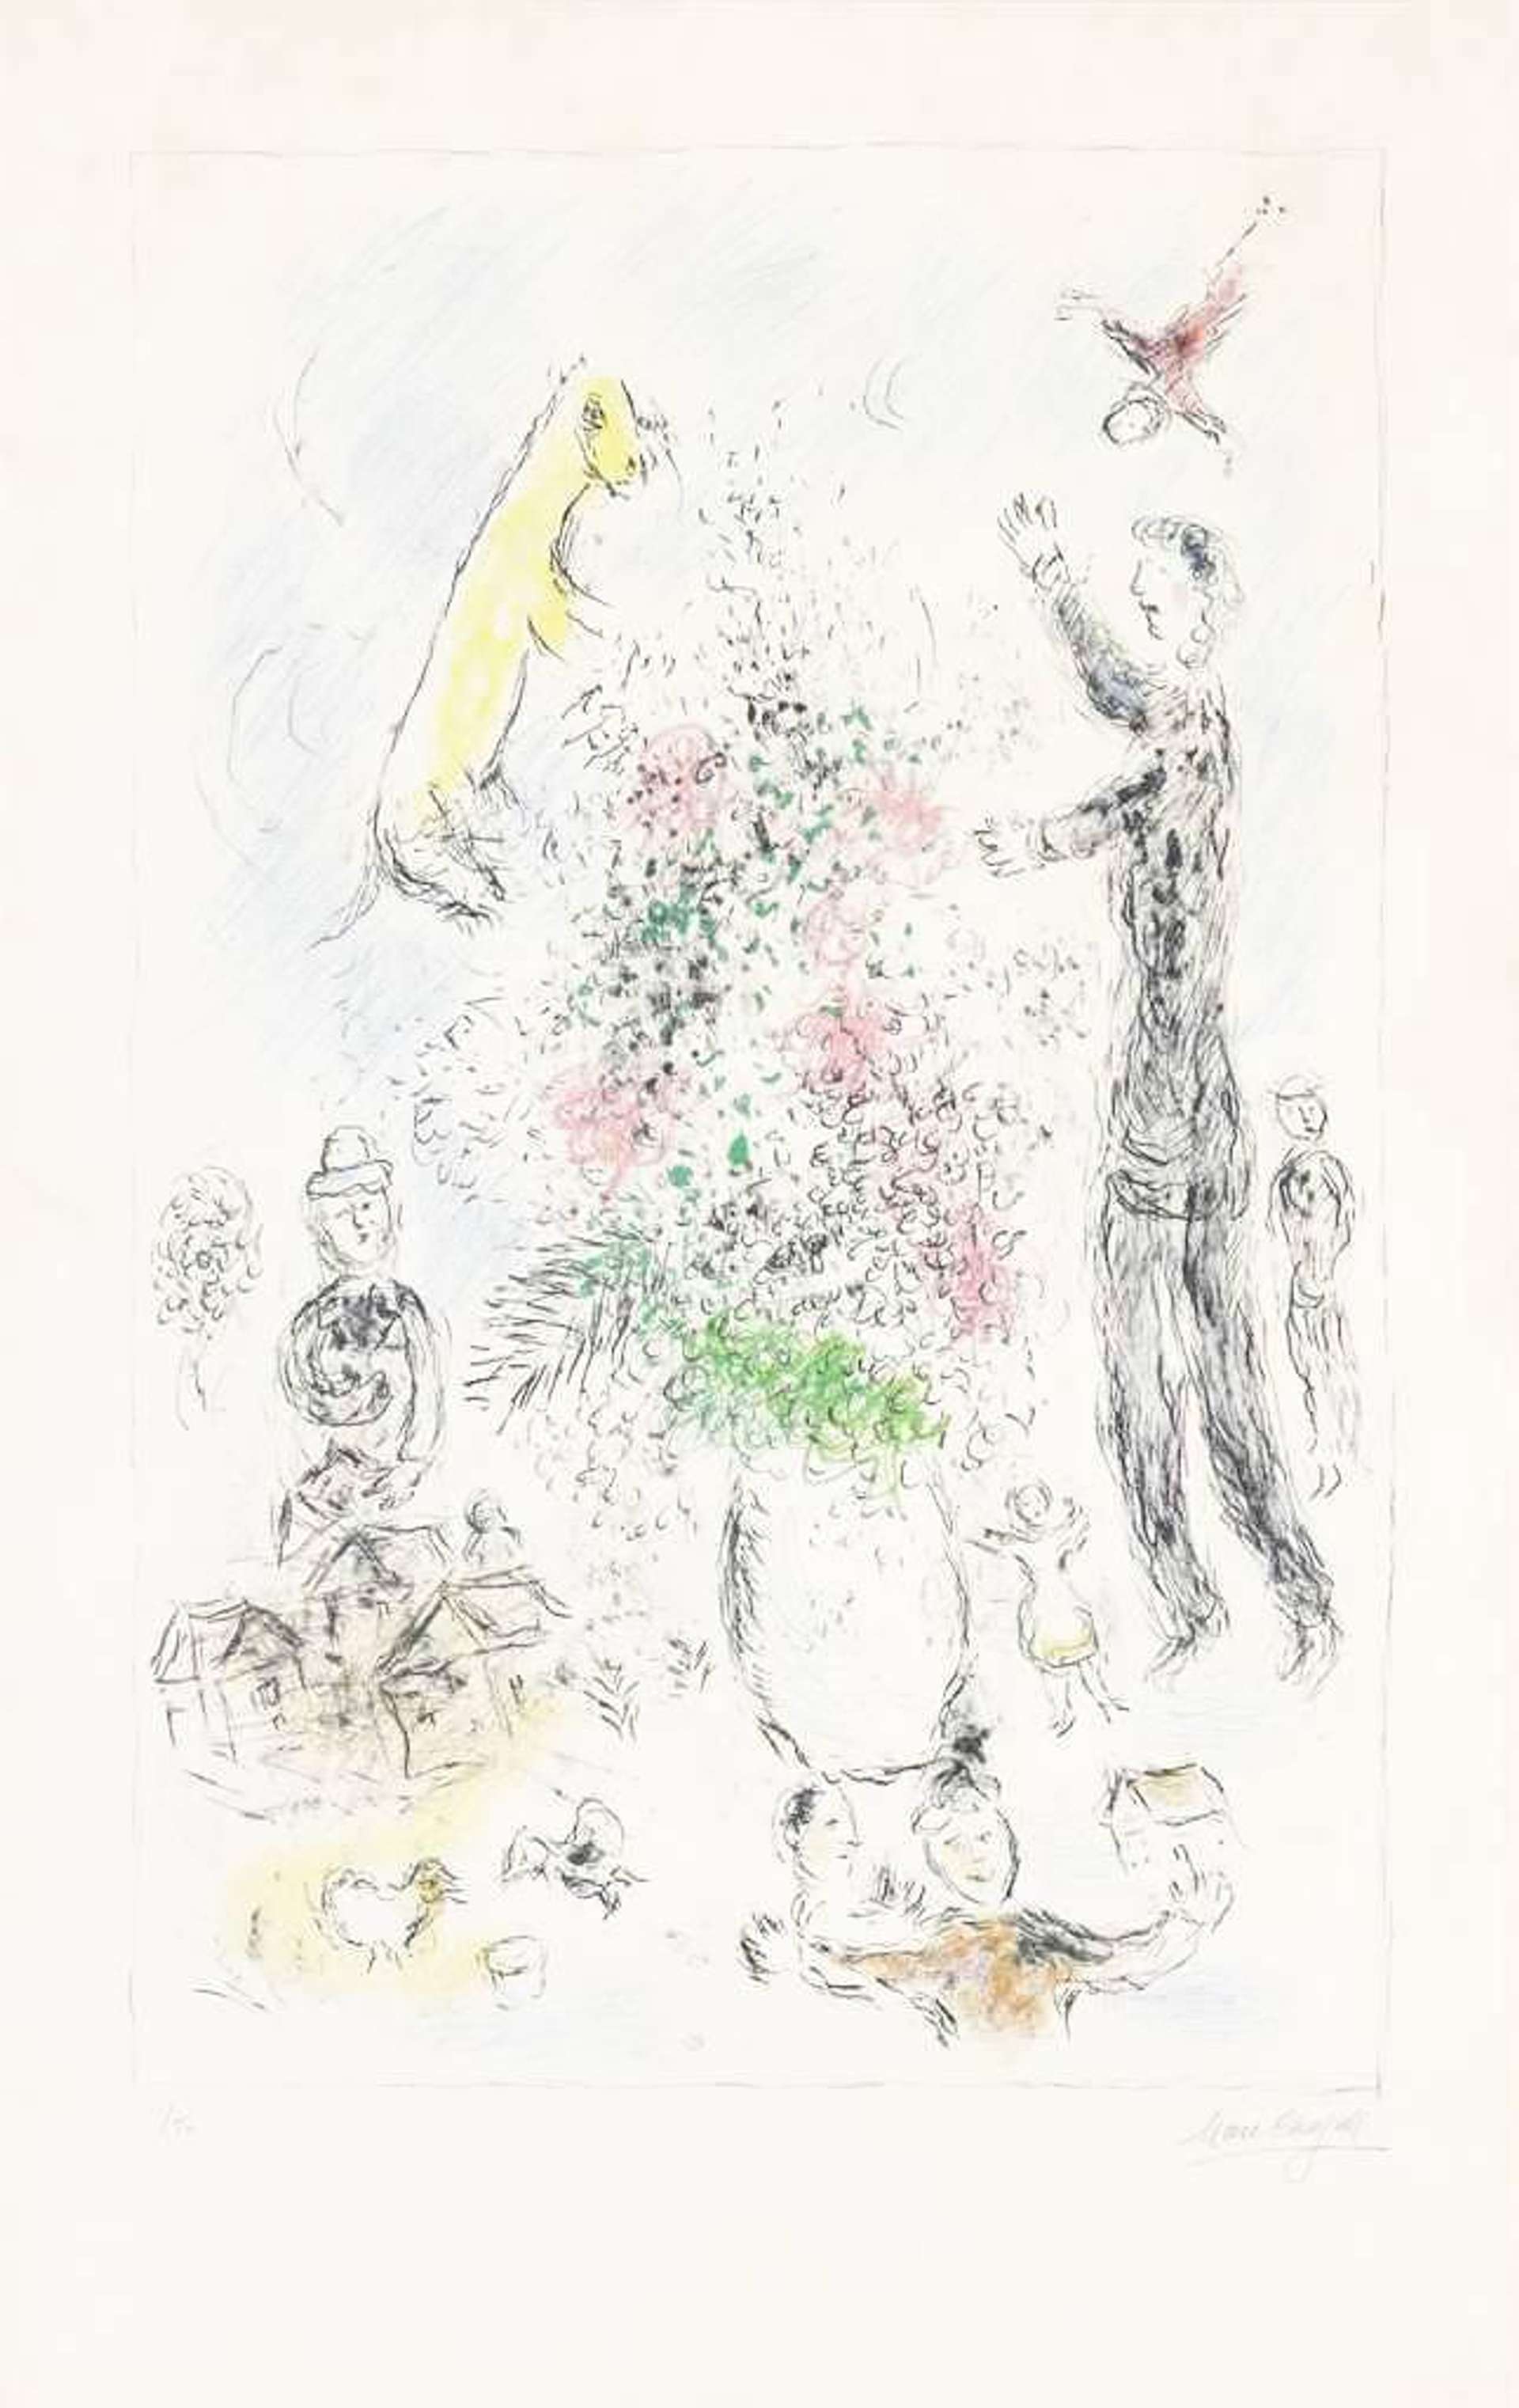 Les Lilas - Signed Print by Marc Chagall 1980 - MyArtBroker